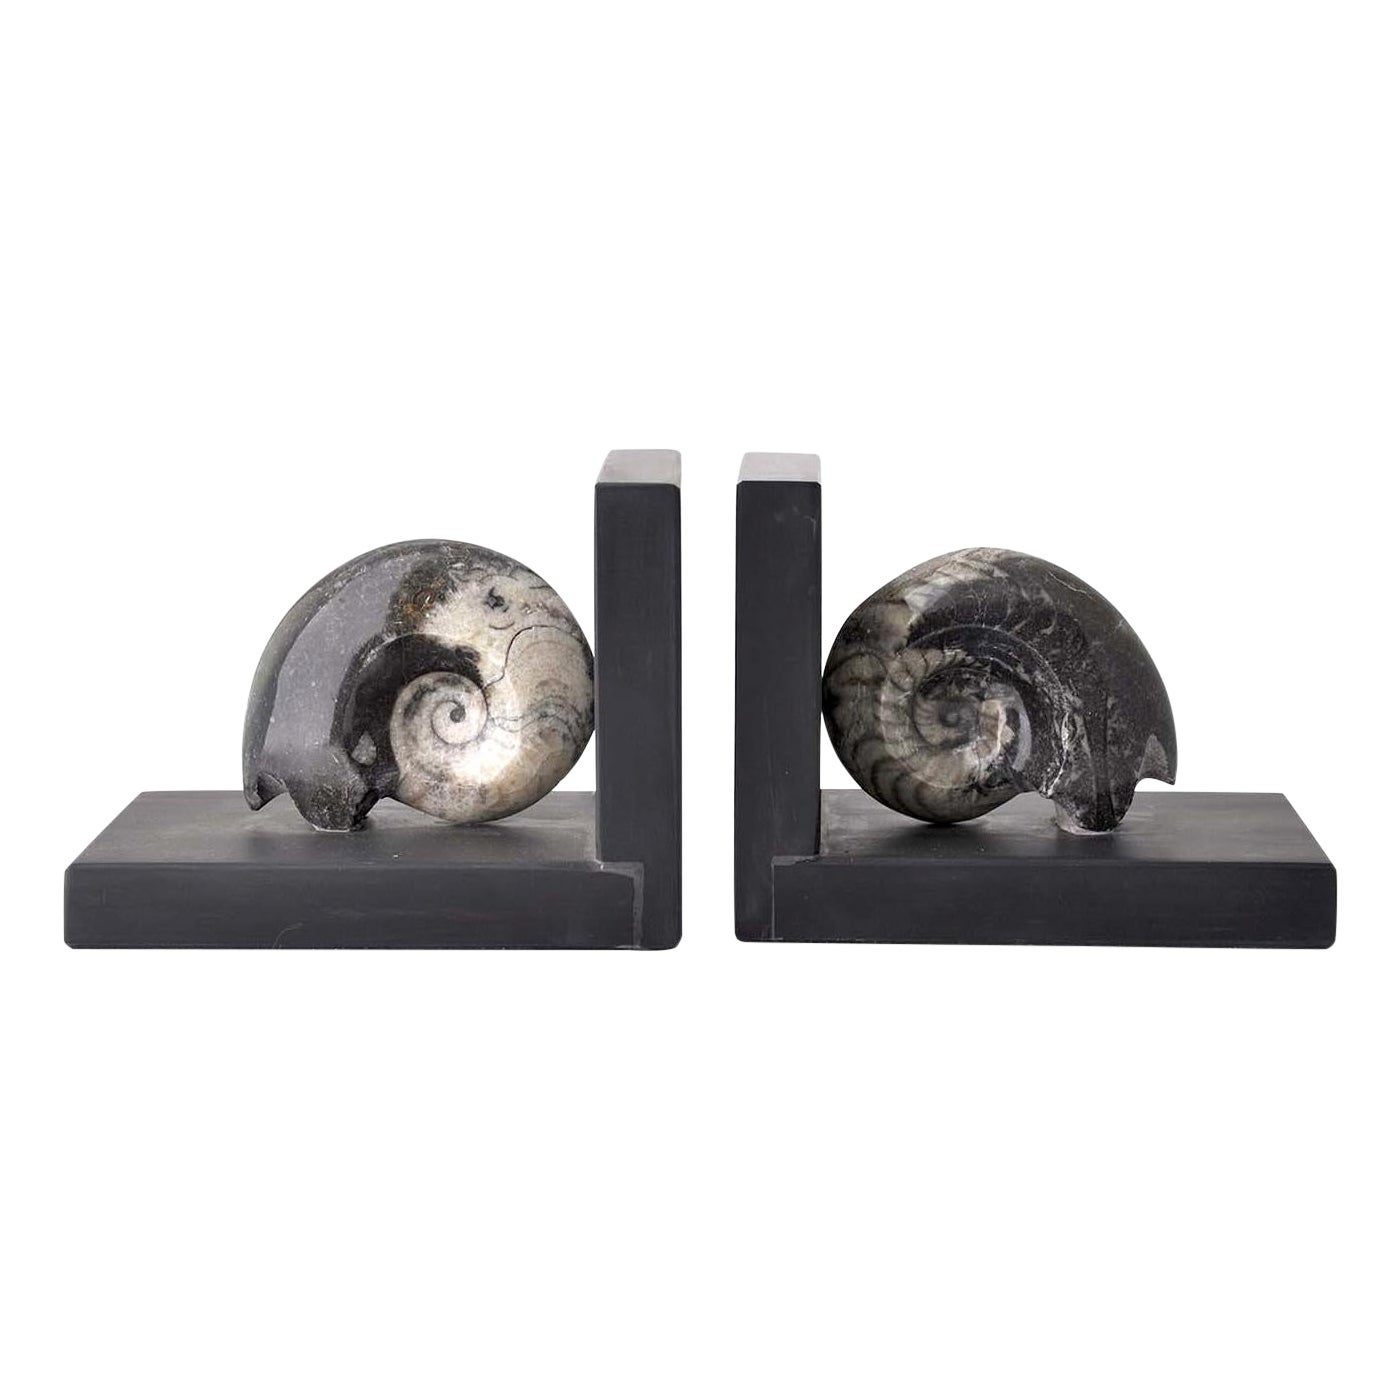 Fossiline Set of Black Bookends by Nino Basso For Sale